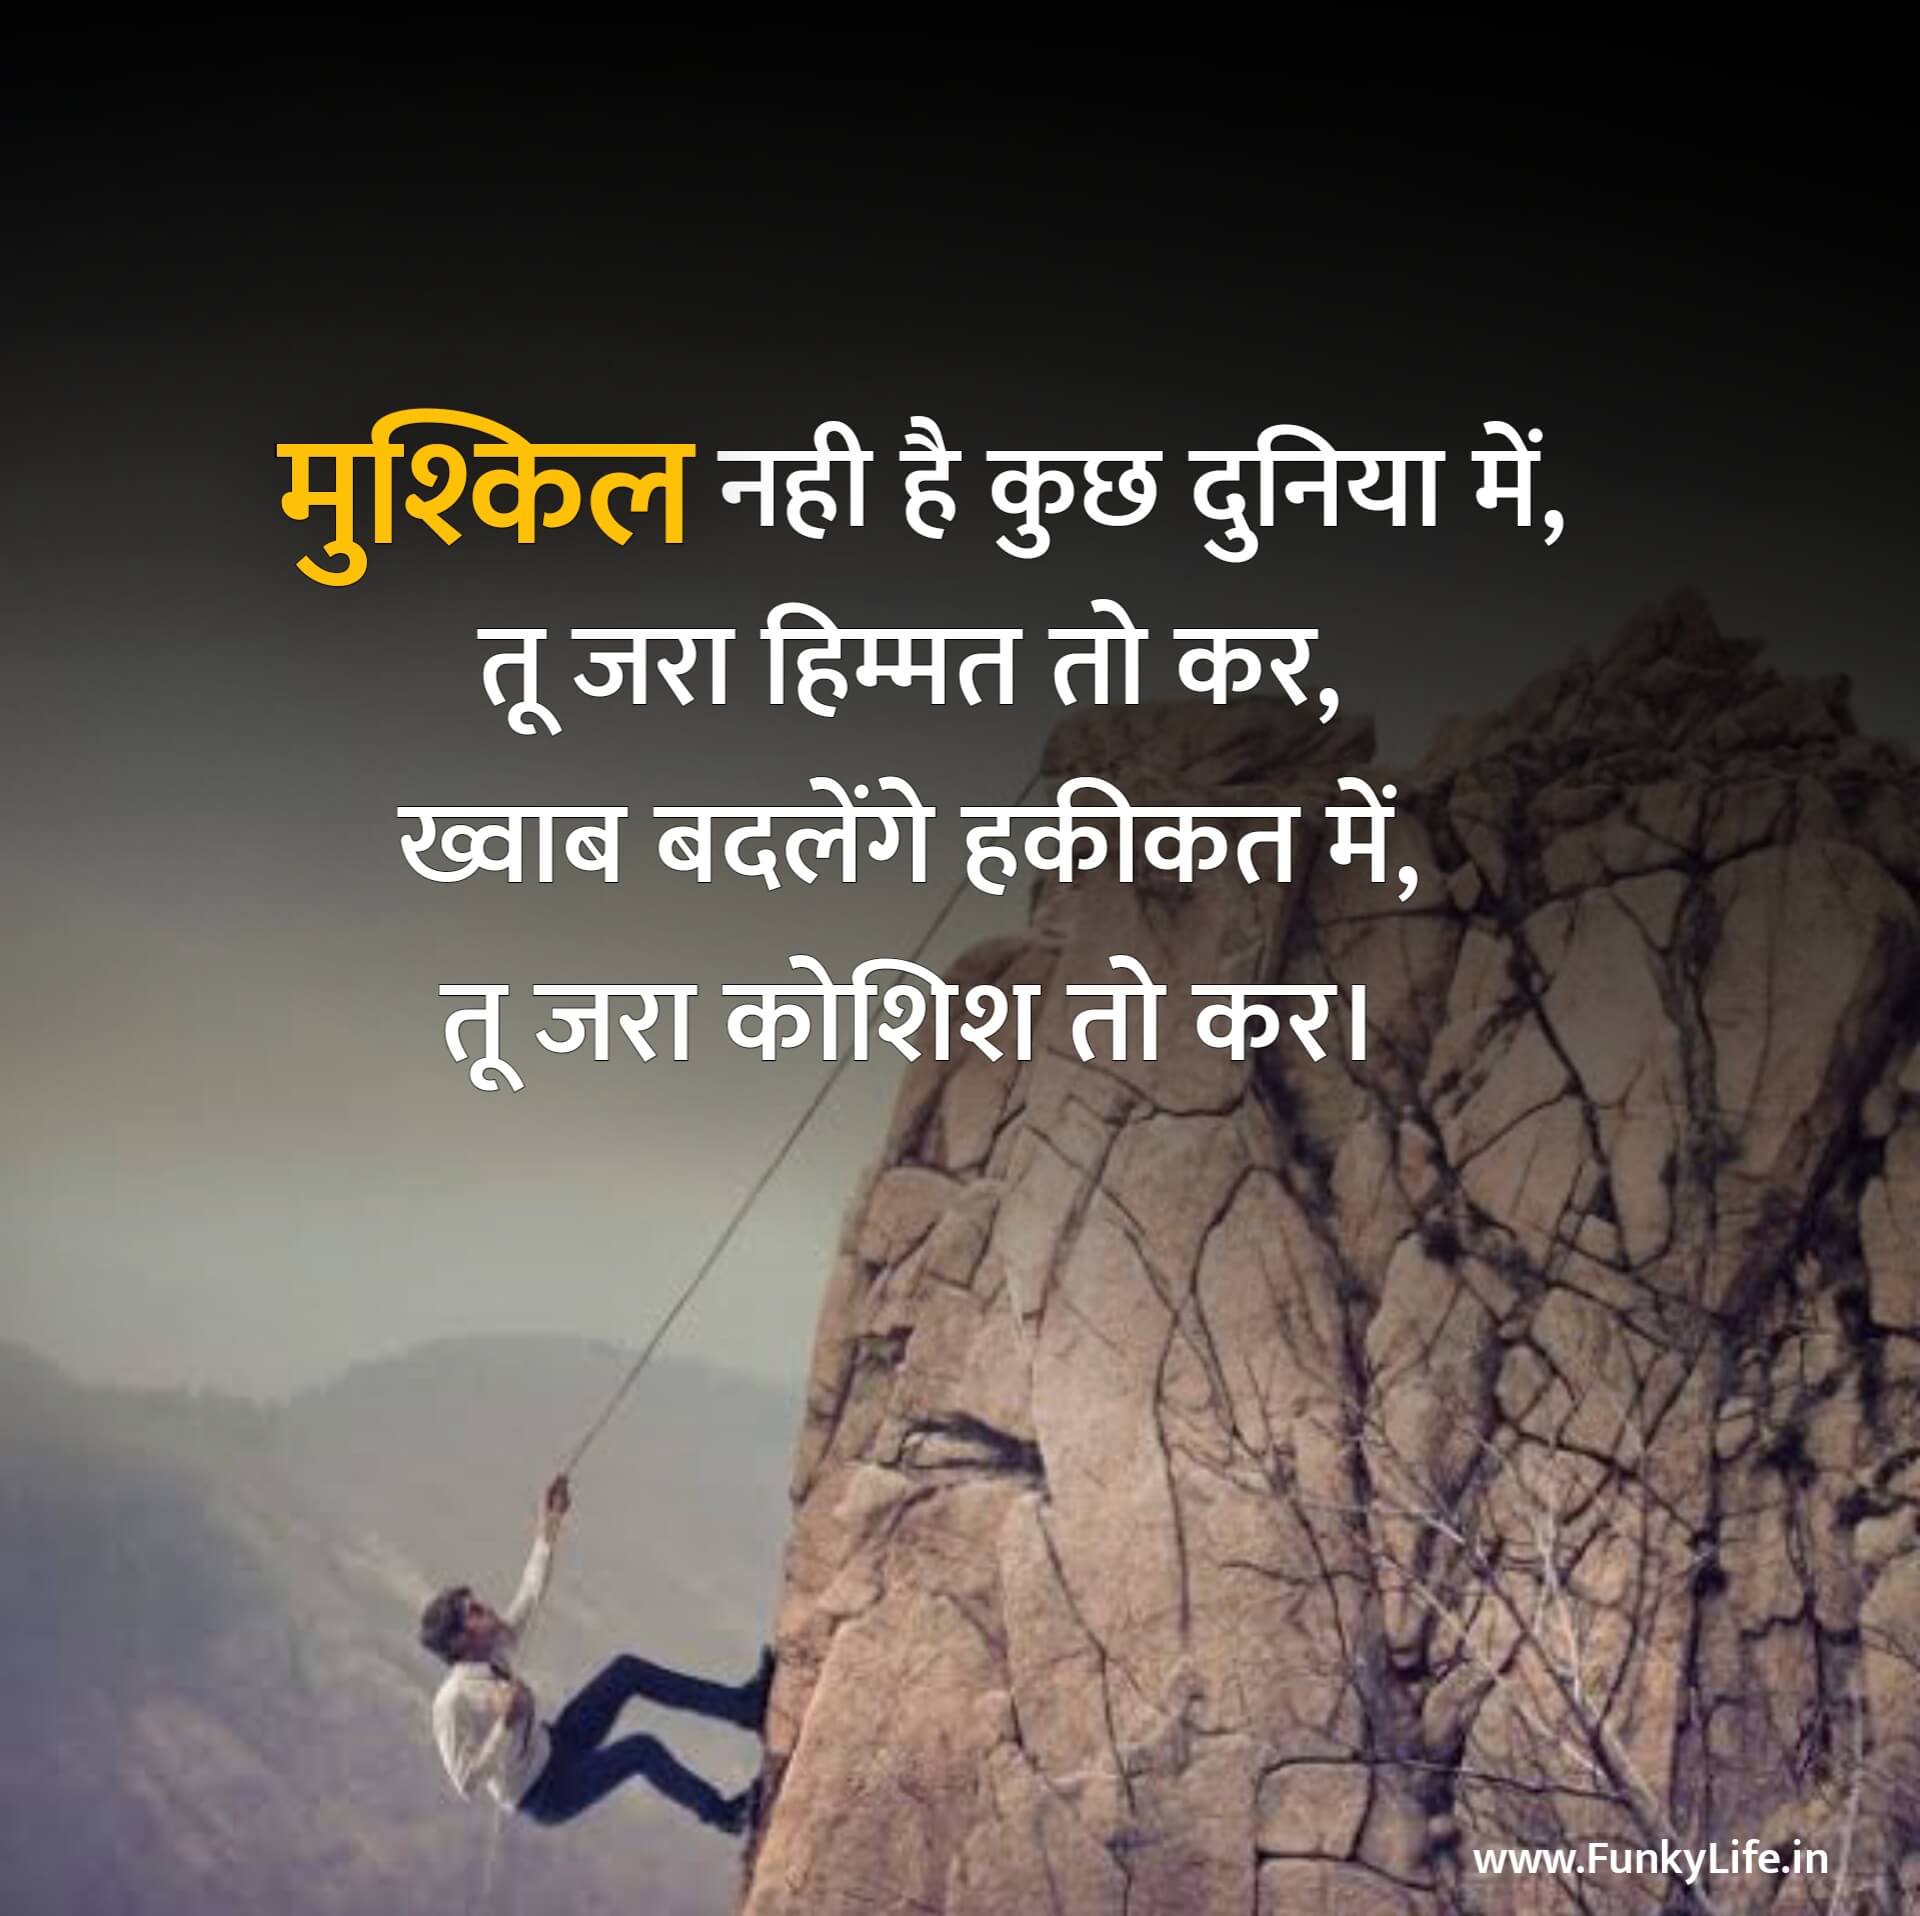 Courage Motivational Quote in Hindi